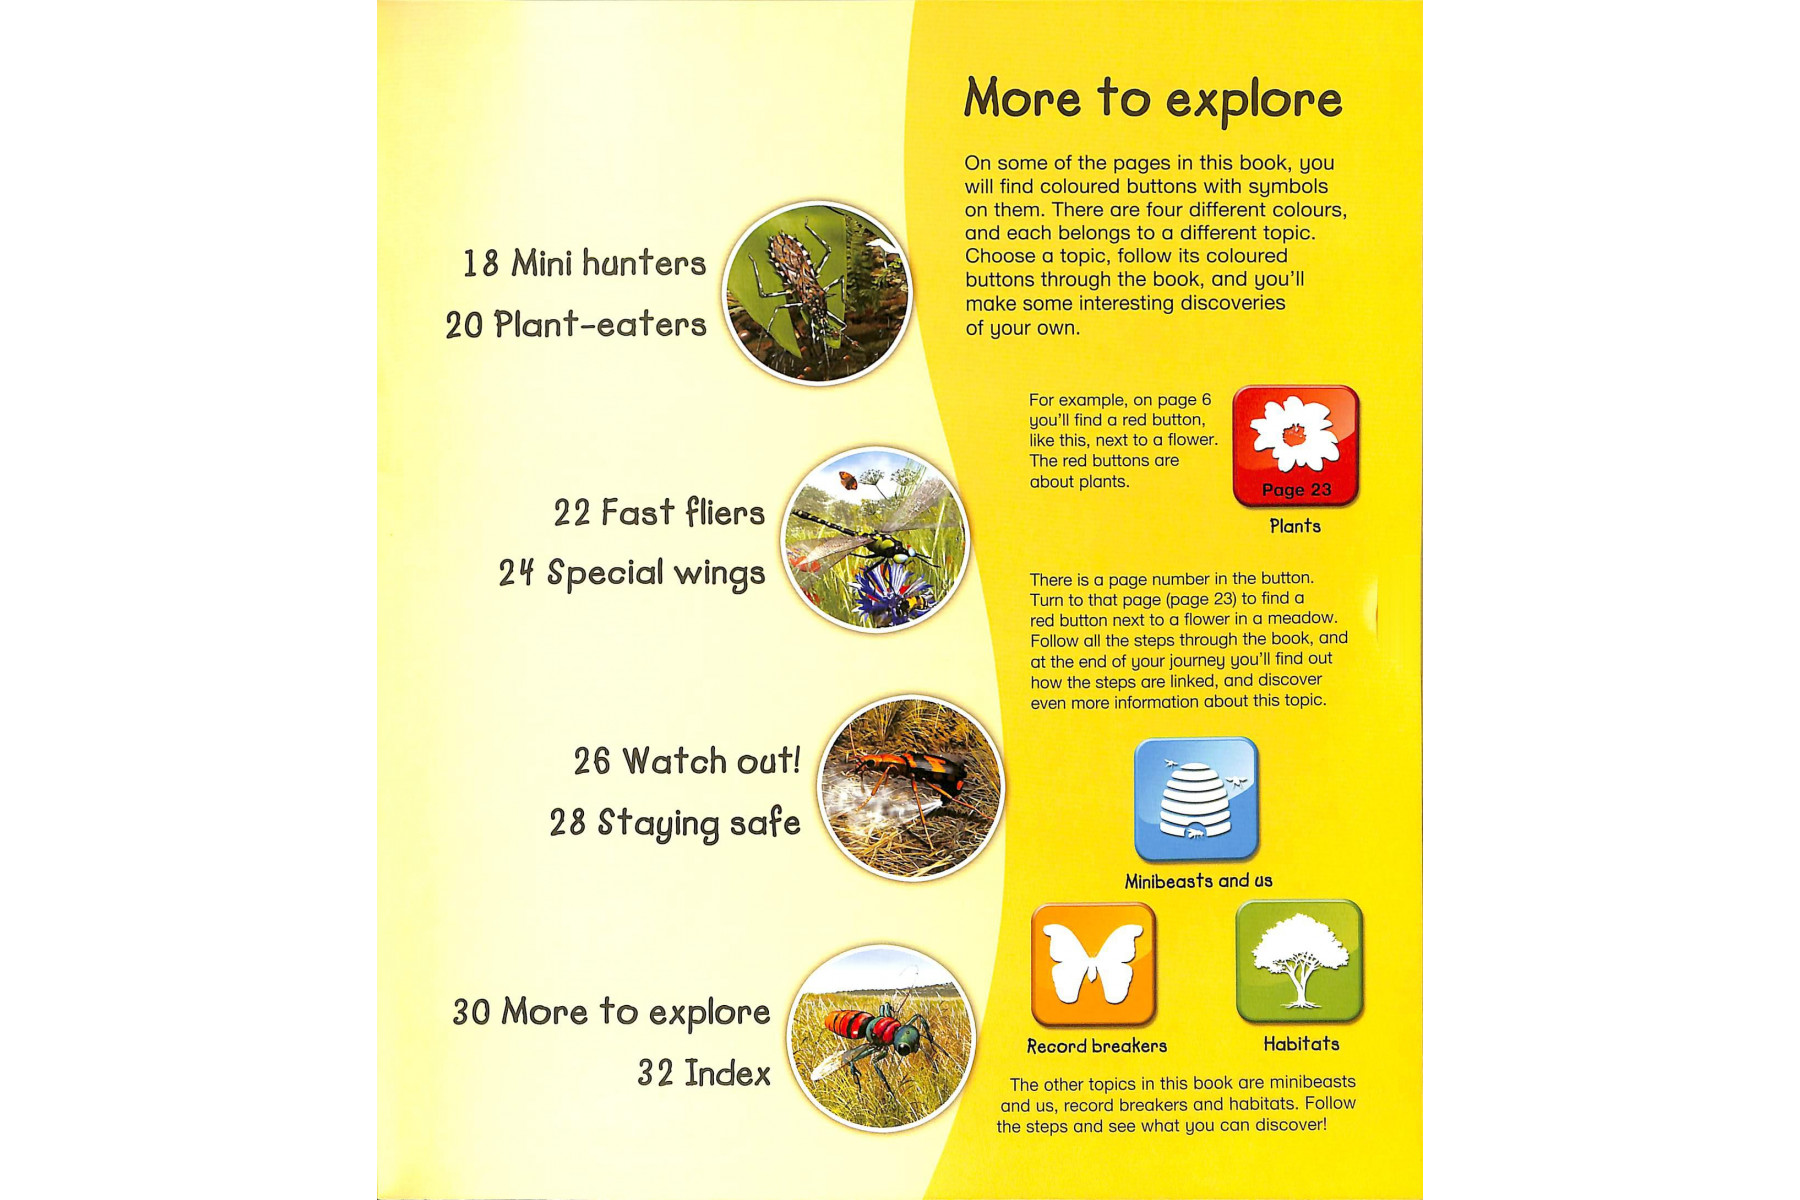 Explorers: Insects and Minibeasts